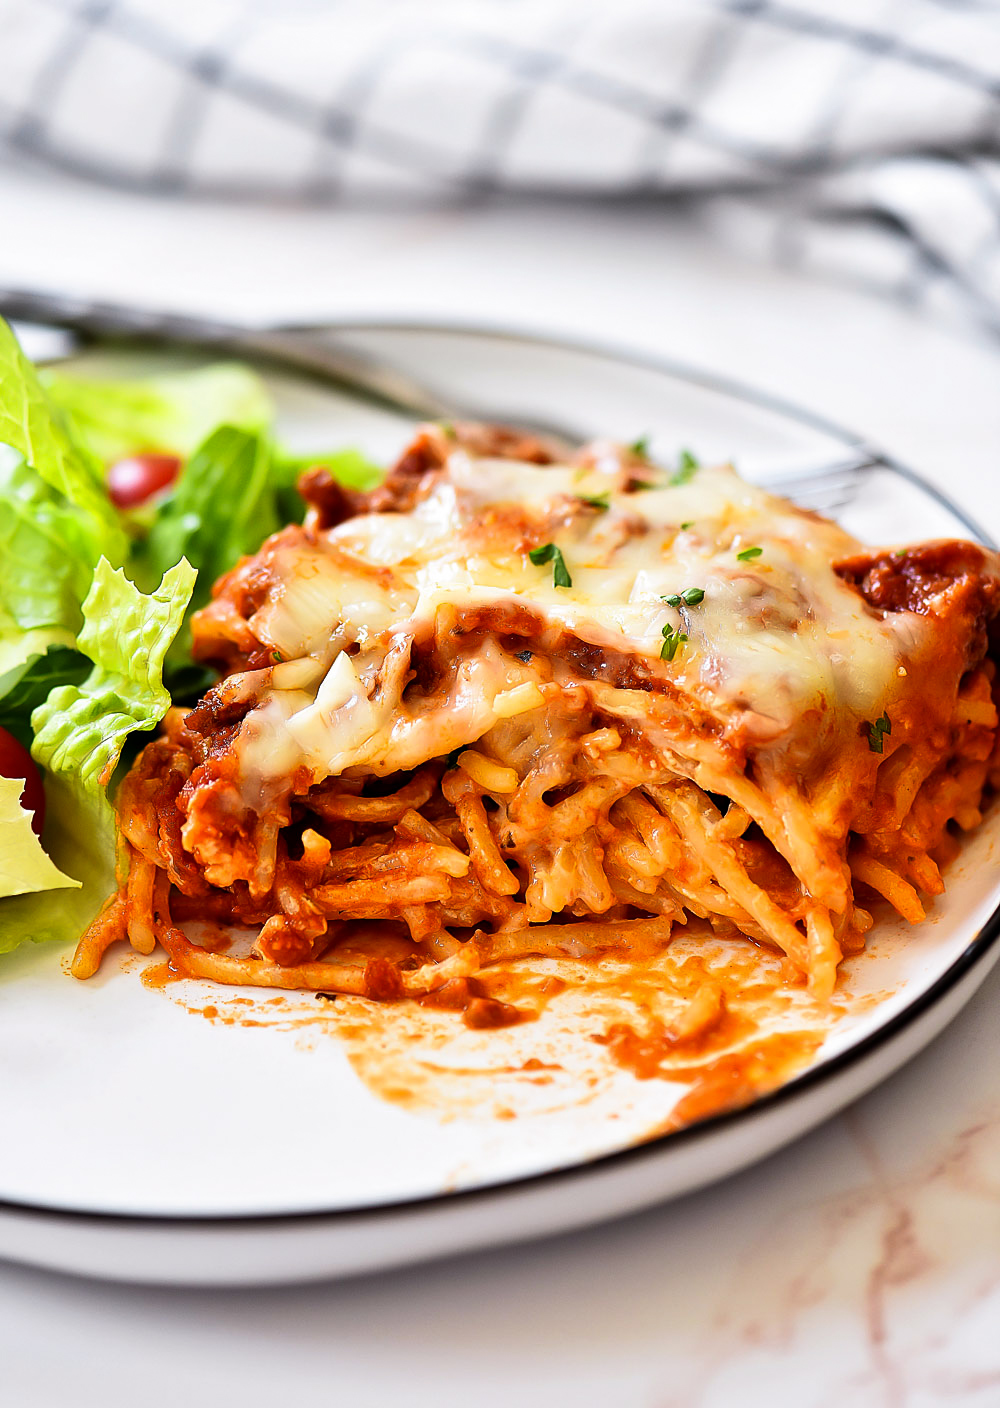 Baked Spaghetti is traditional spaghetti baked in the oven. Life-in-the-Lofthouse.com